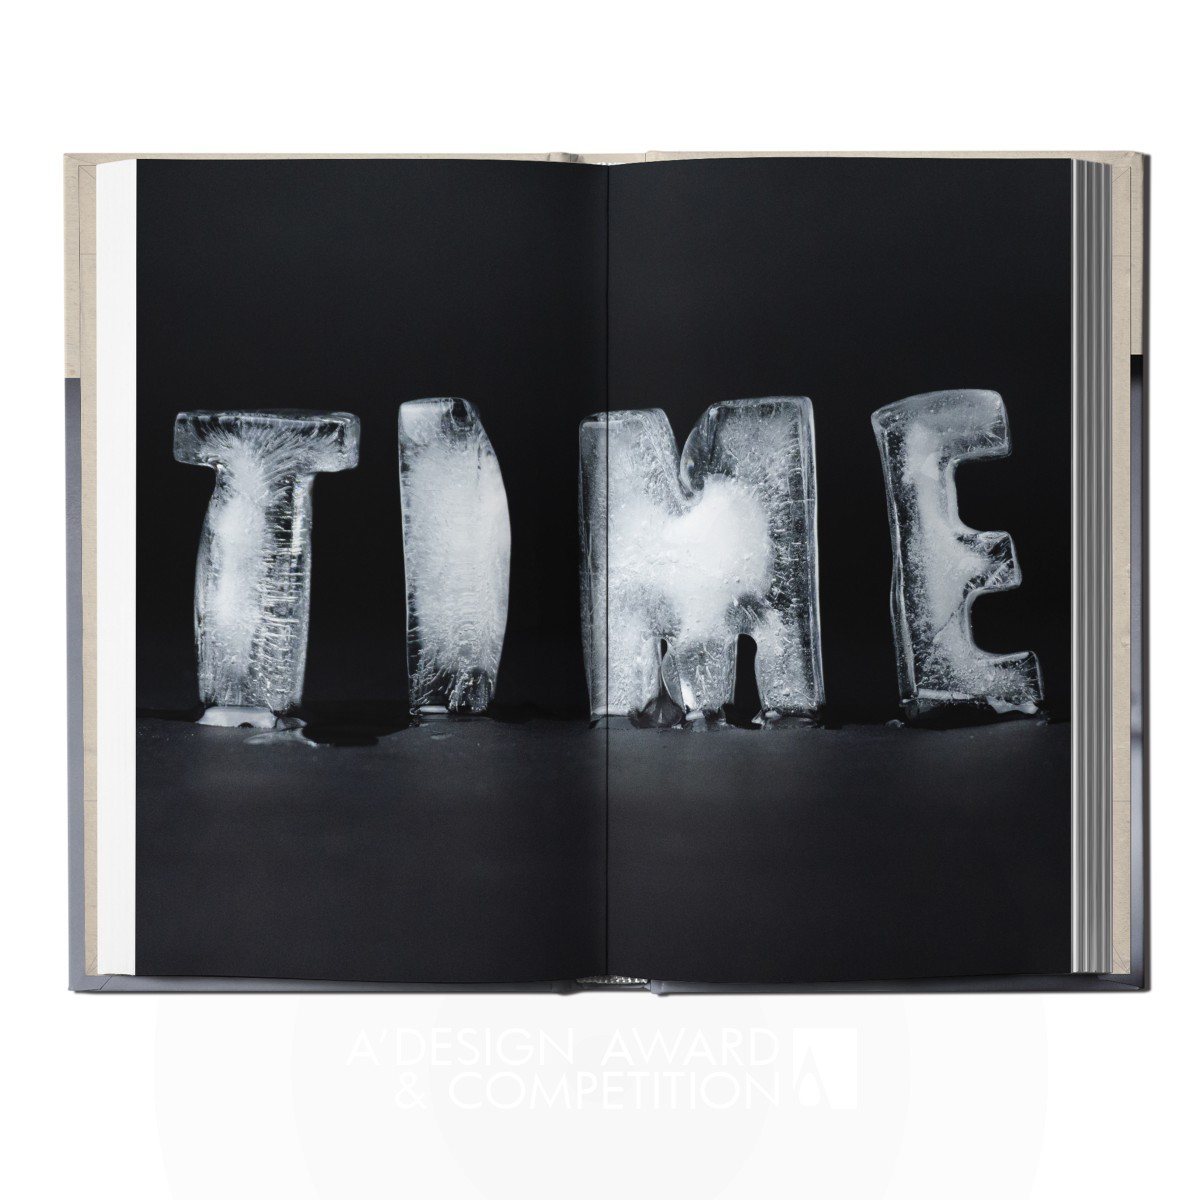 Discussing Time: A Collective Book Design Project